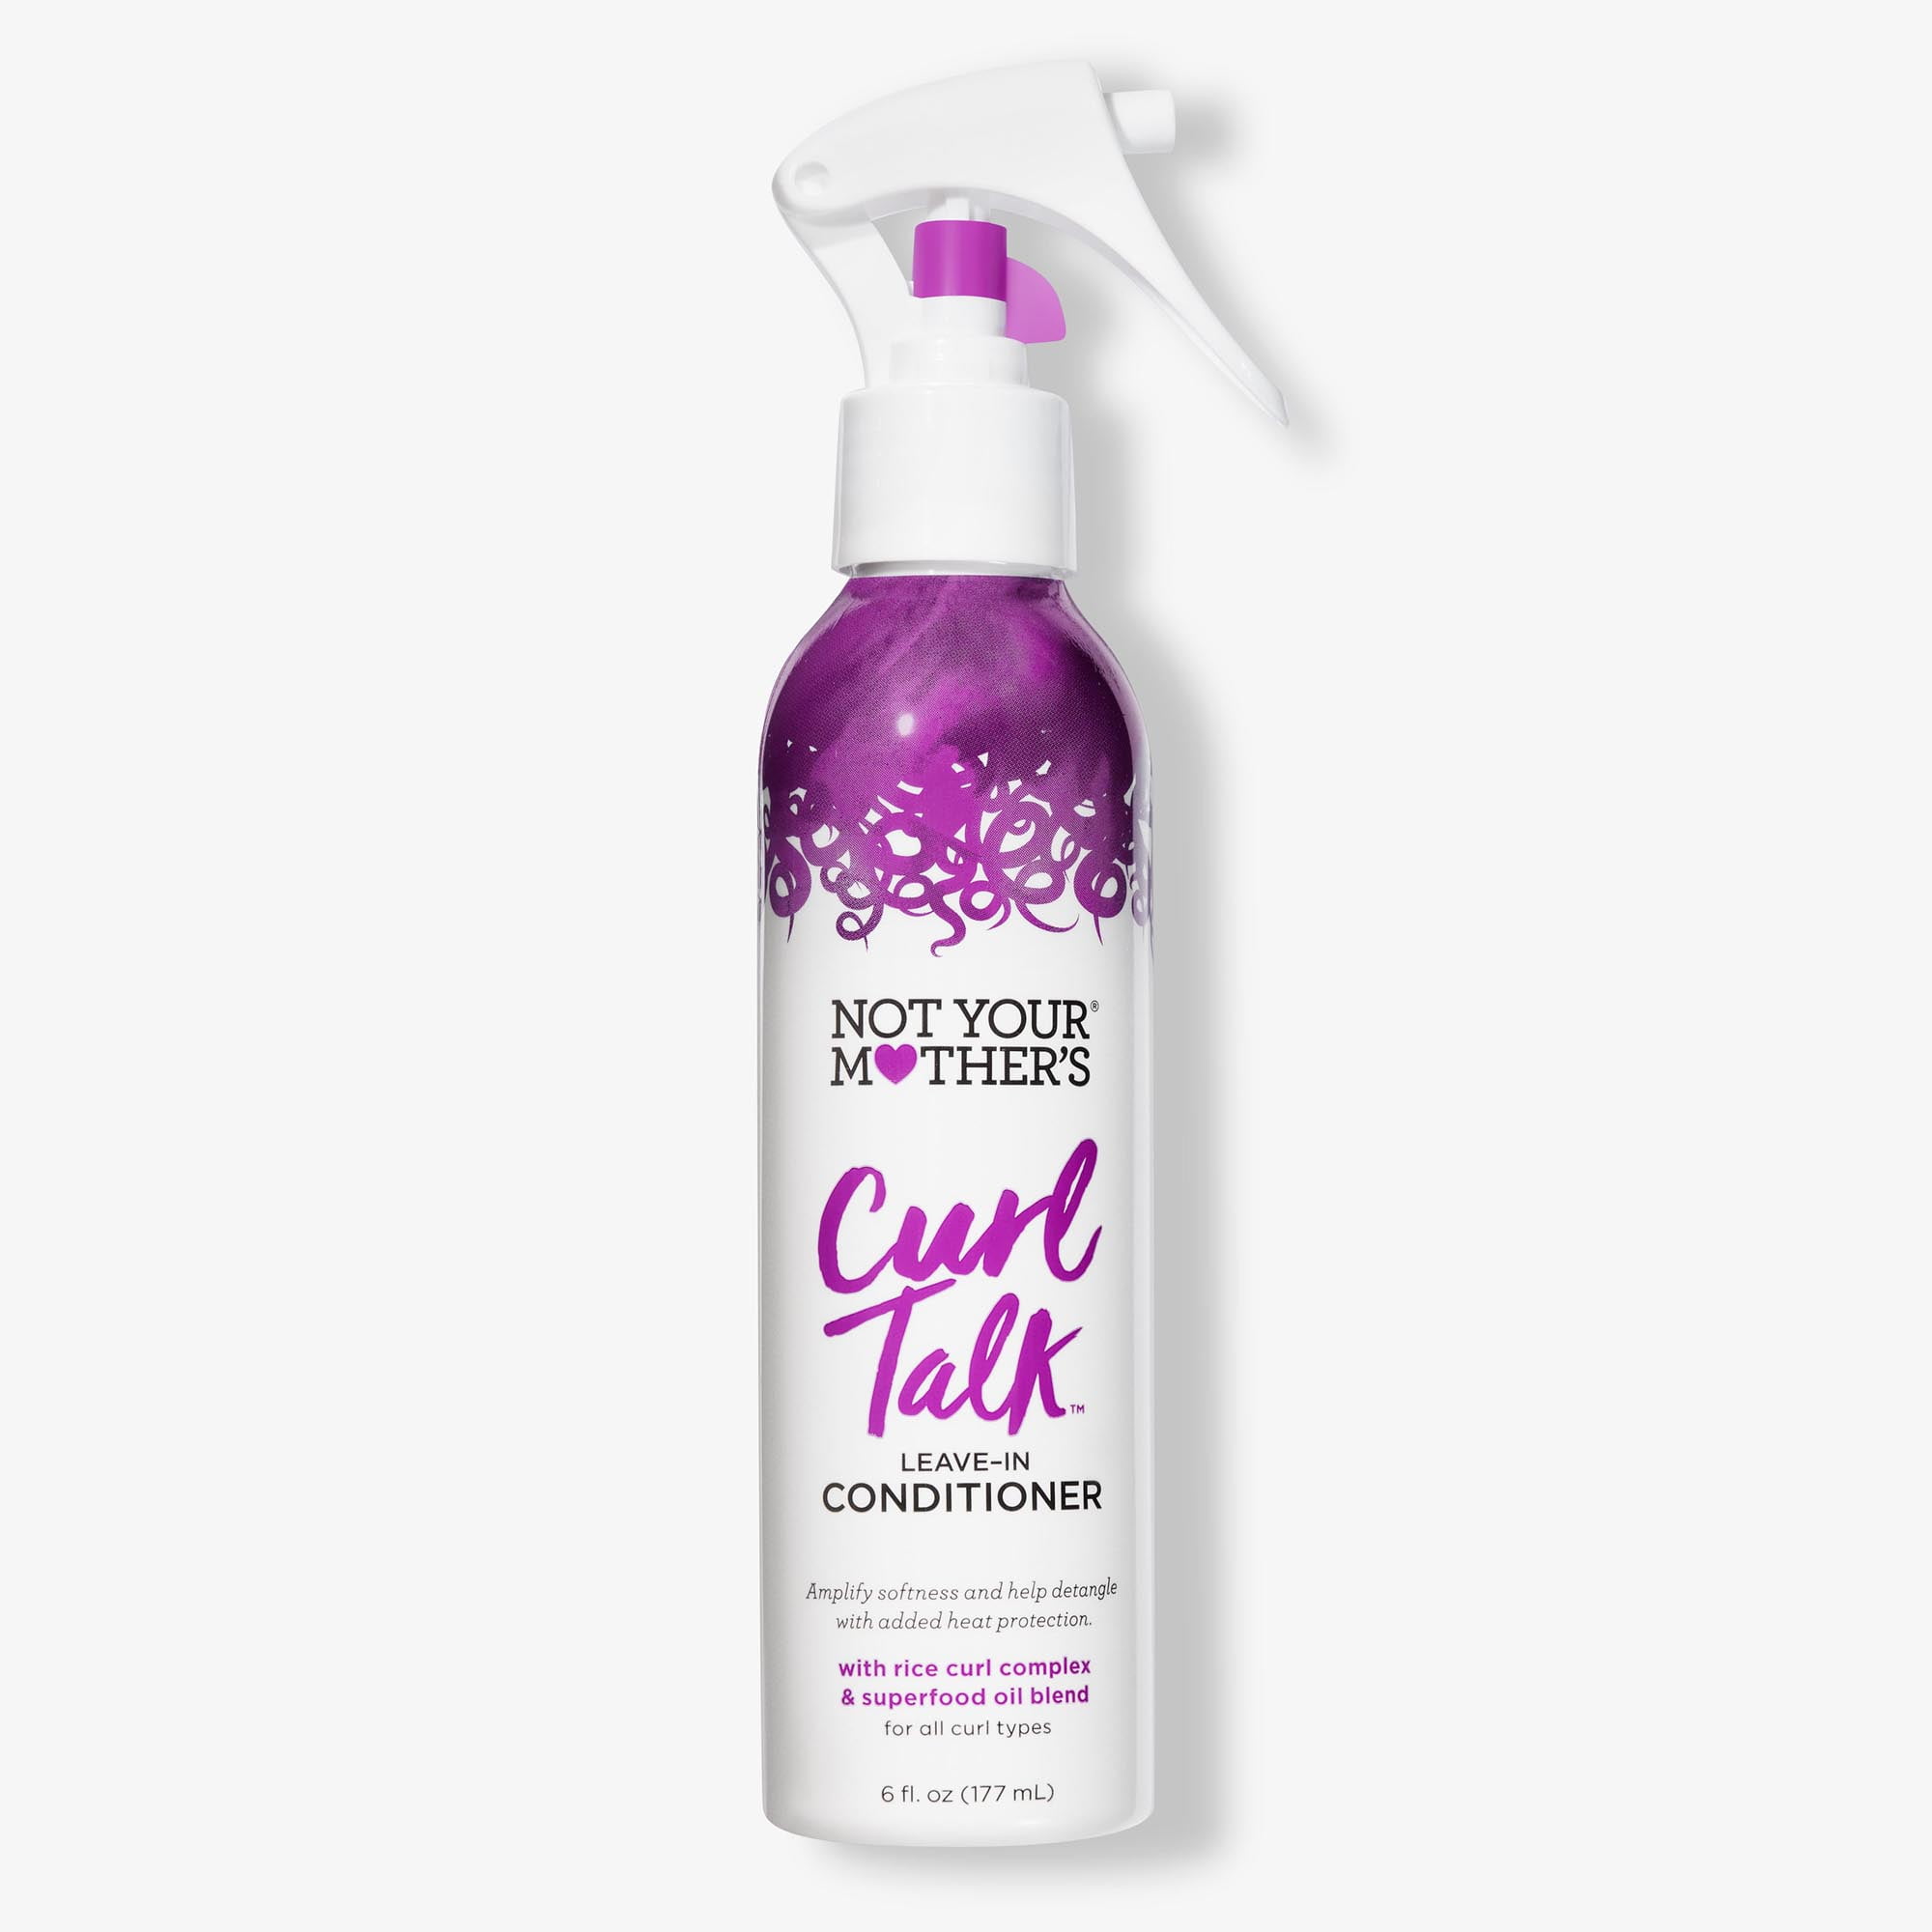 Not Your Mother's Curl Talk Leave-In Conditioner Spray, 6 oz